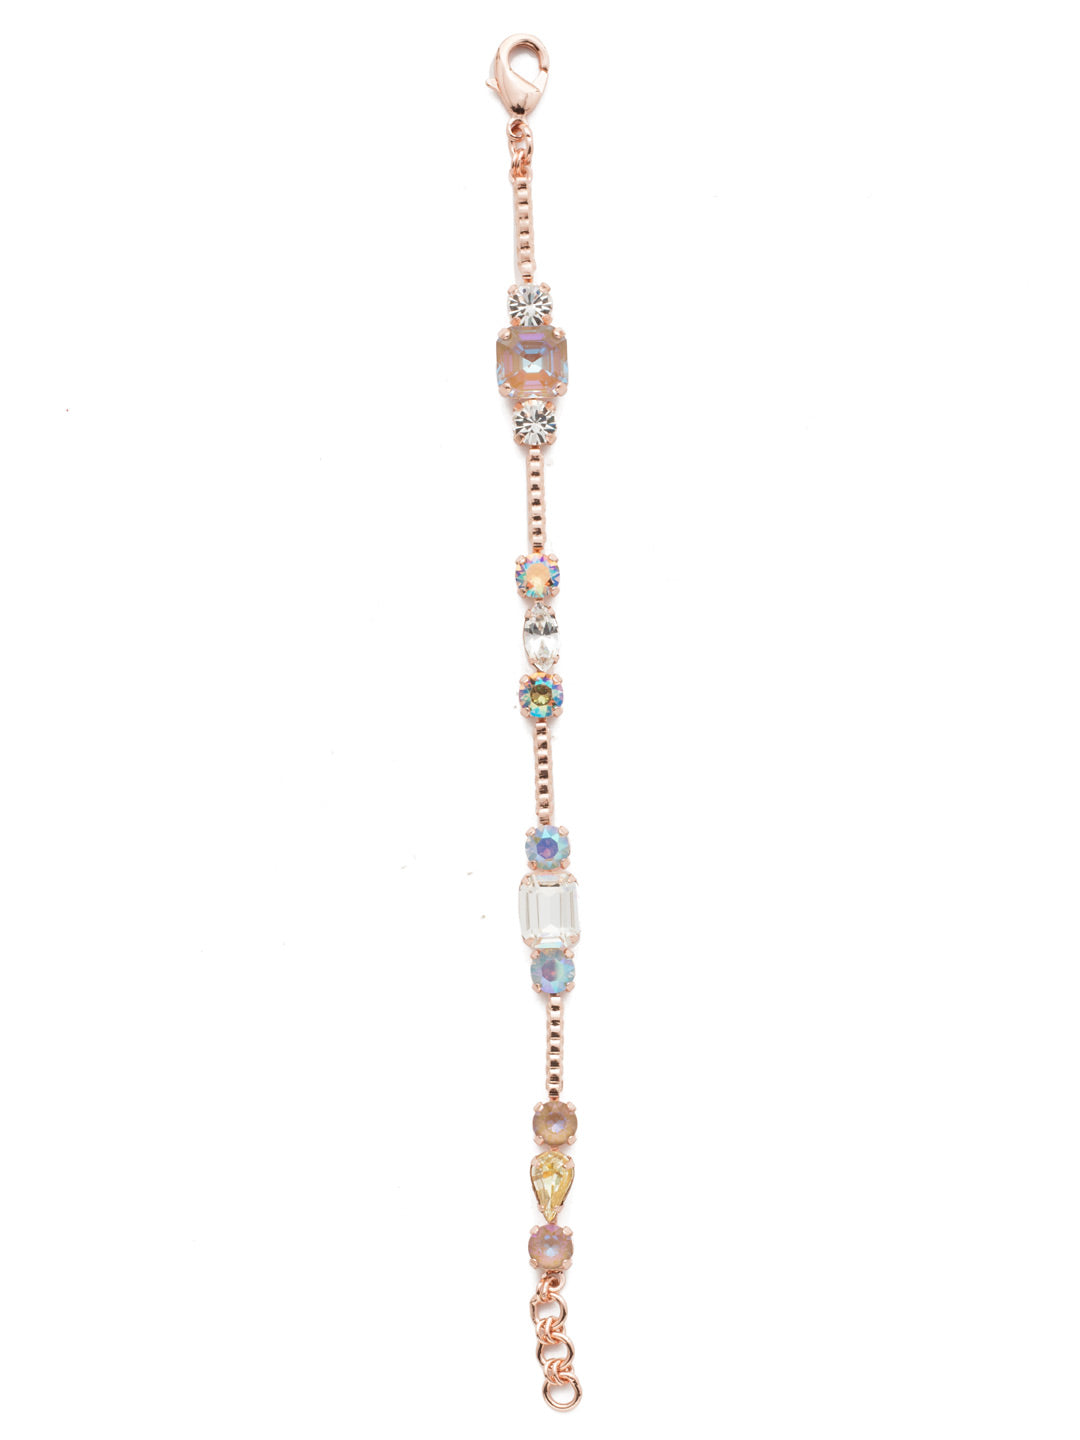 Natalie Tennis Bracelet - BEN18RGROG - <p>The Natalie Tennis Bracelet is sophisticated glam wrapped around your wrist. The delicate metal base showcases elegant baquette-shaped stones and other crystal adornments that prove simplicity is stylish. From Sorrelli's Rose Garden  collection in our Rose Gold-tone finish.</p>